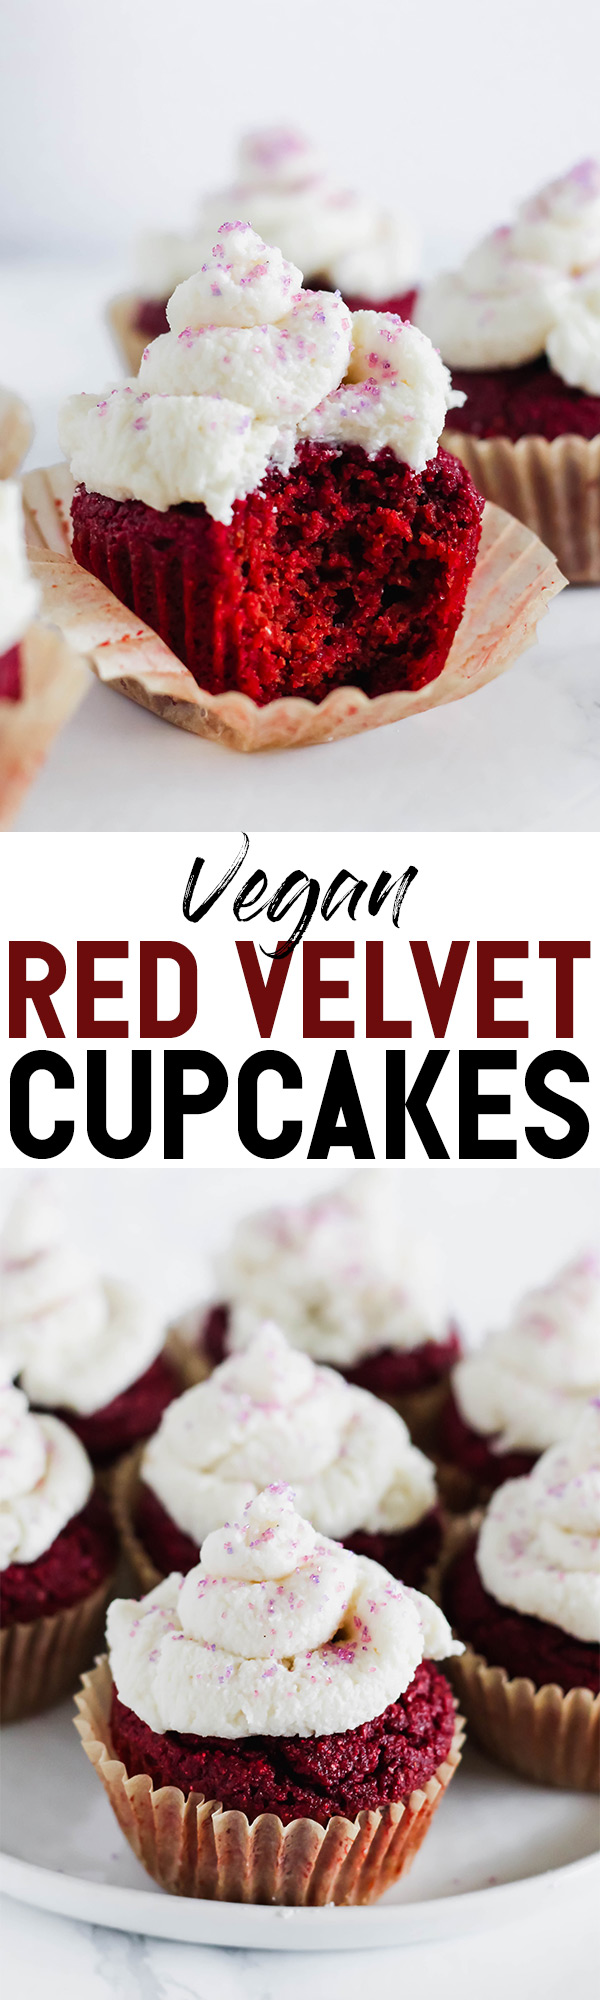 These fluffy Vegan Red Velvet Cupcakes are hiding a secret ingredients (beets!), but no one will ever know! They're perfectly sweet and made with simple ingredients. Topped off with a creamy coconut frosting!